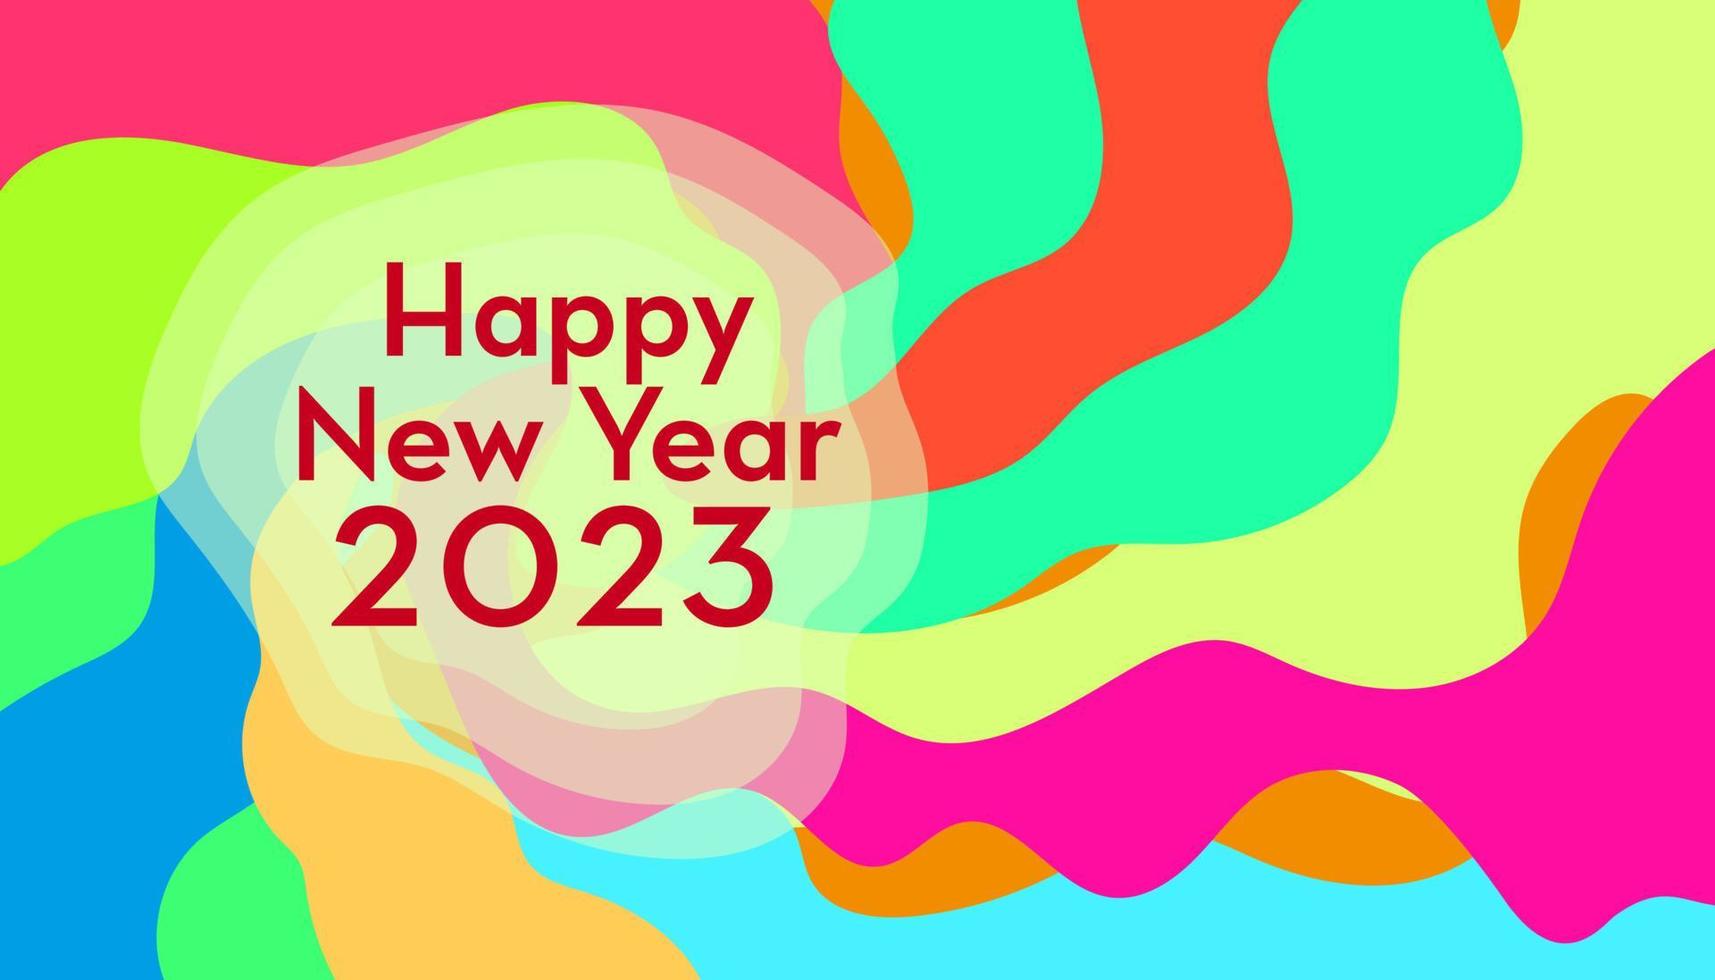 The Beautiful New Year Background Design vector